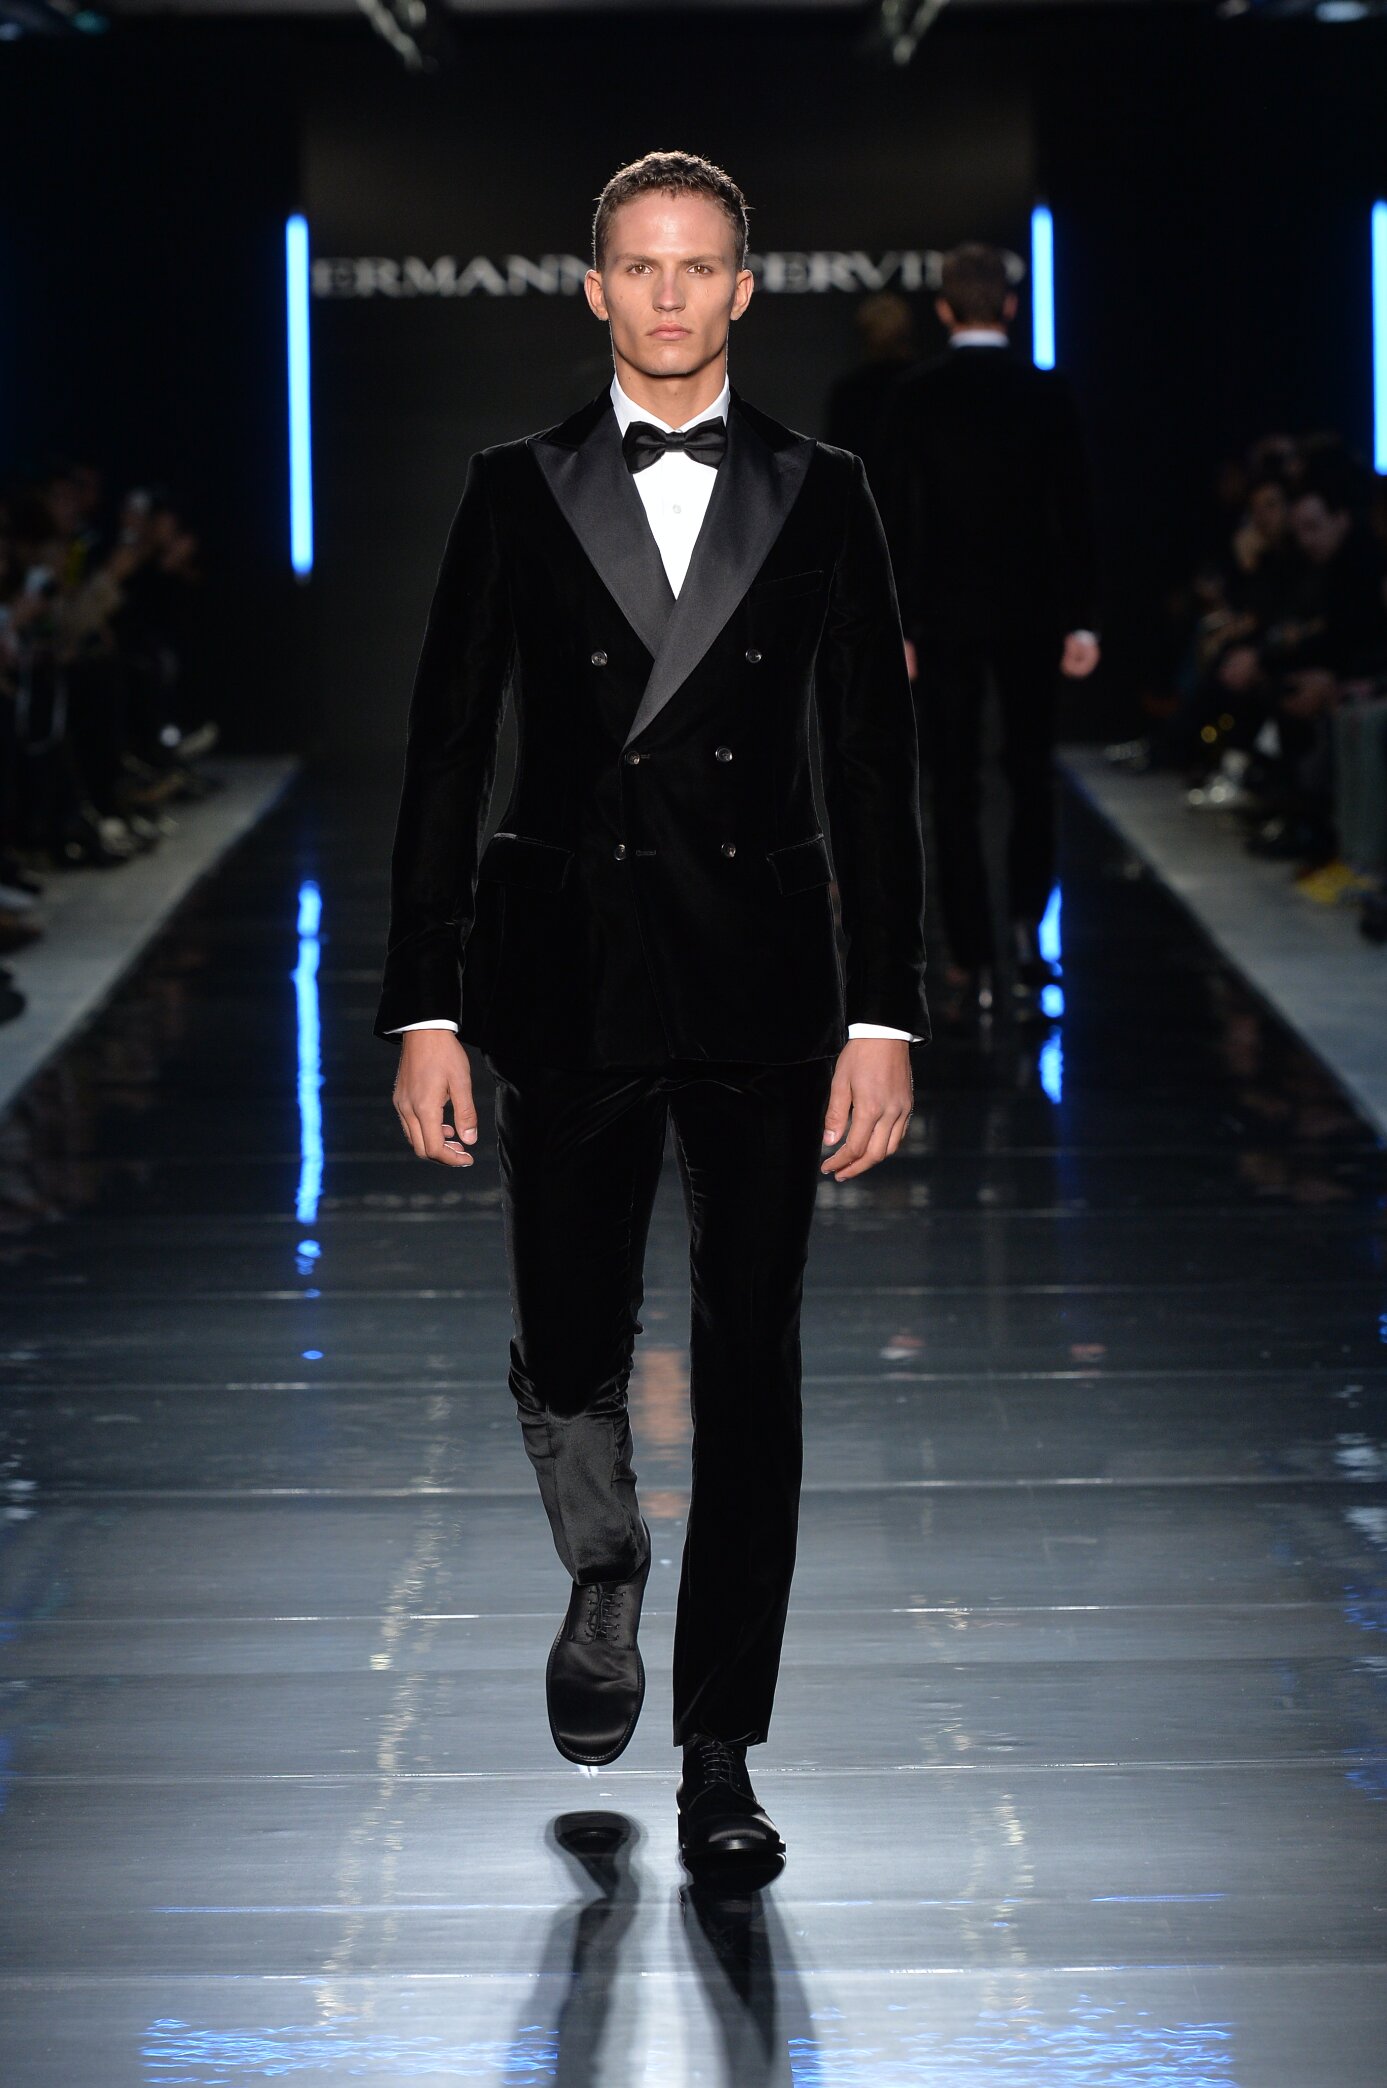 ERMANNO SCERVINO FALL WINTER 2014 MEN’S COLLECTION | The Skinny Beep